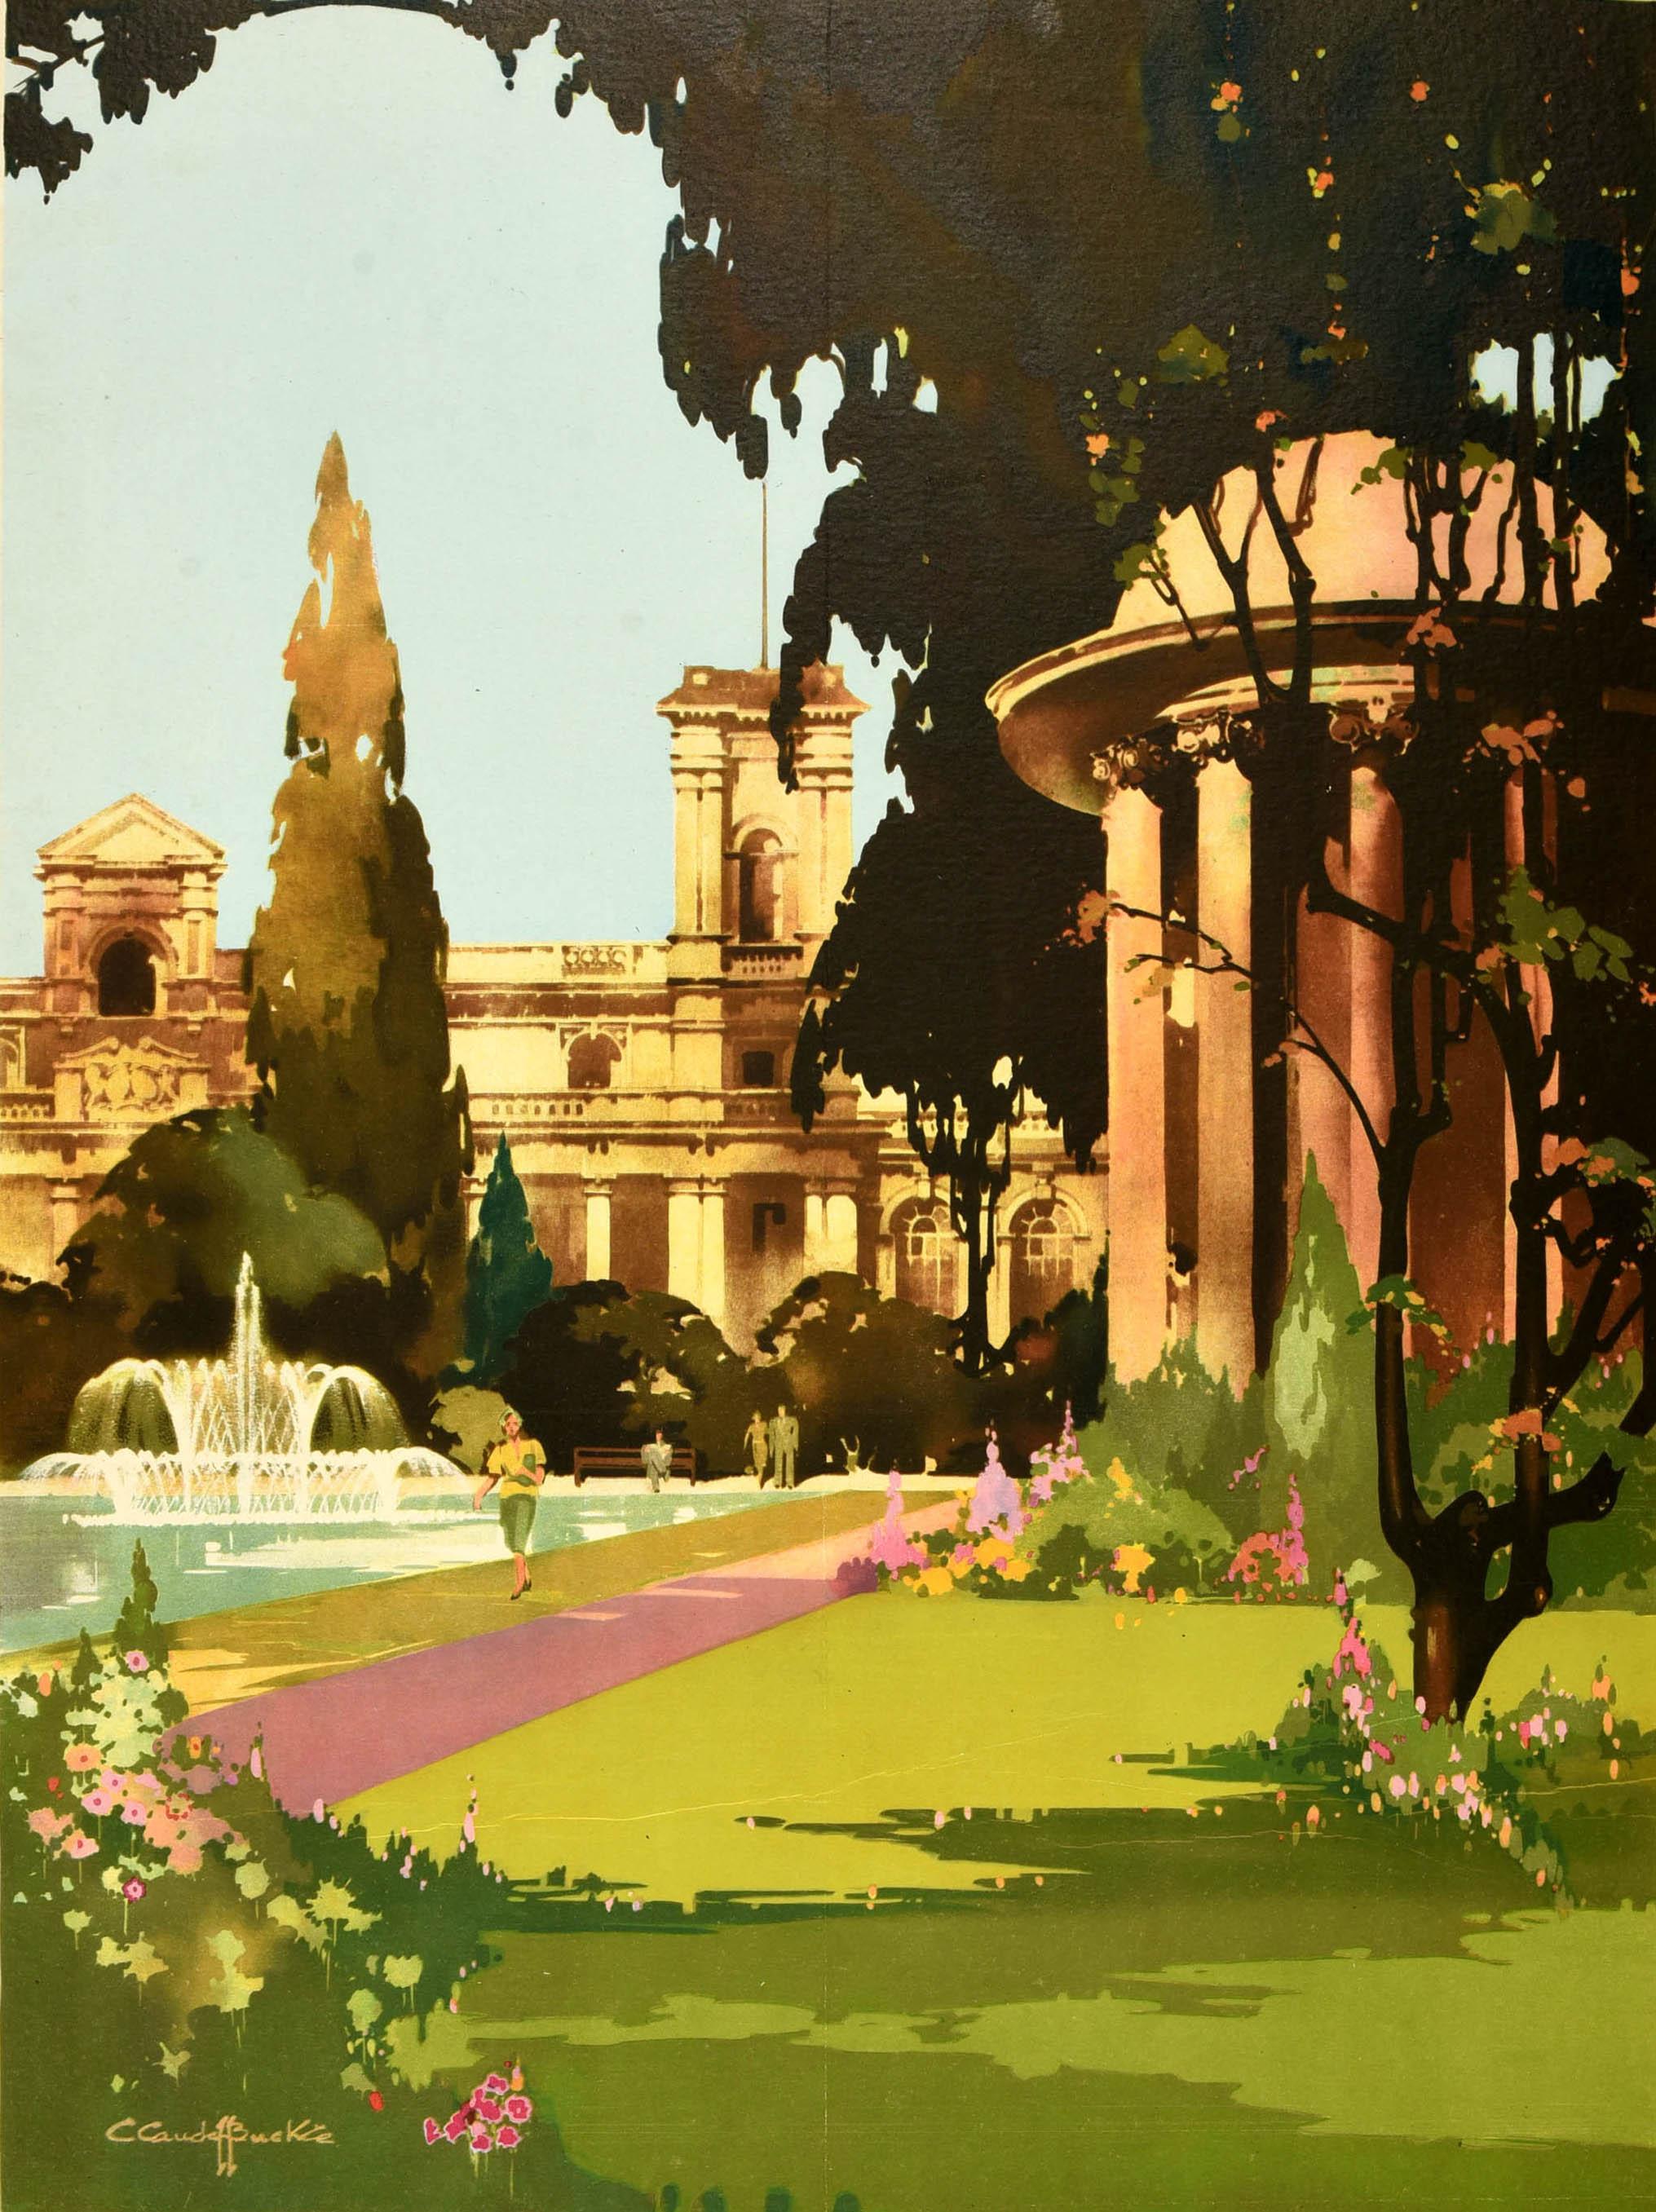 Original vintage travel poster for Royal Leamington Spa issued by British Railways featuring a great design by Claude Henry Buckle (1905-1973) depicting the Jephson Gardens Victorian formal park on the parade with people walking around the fountain